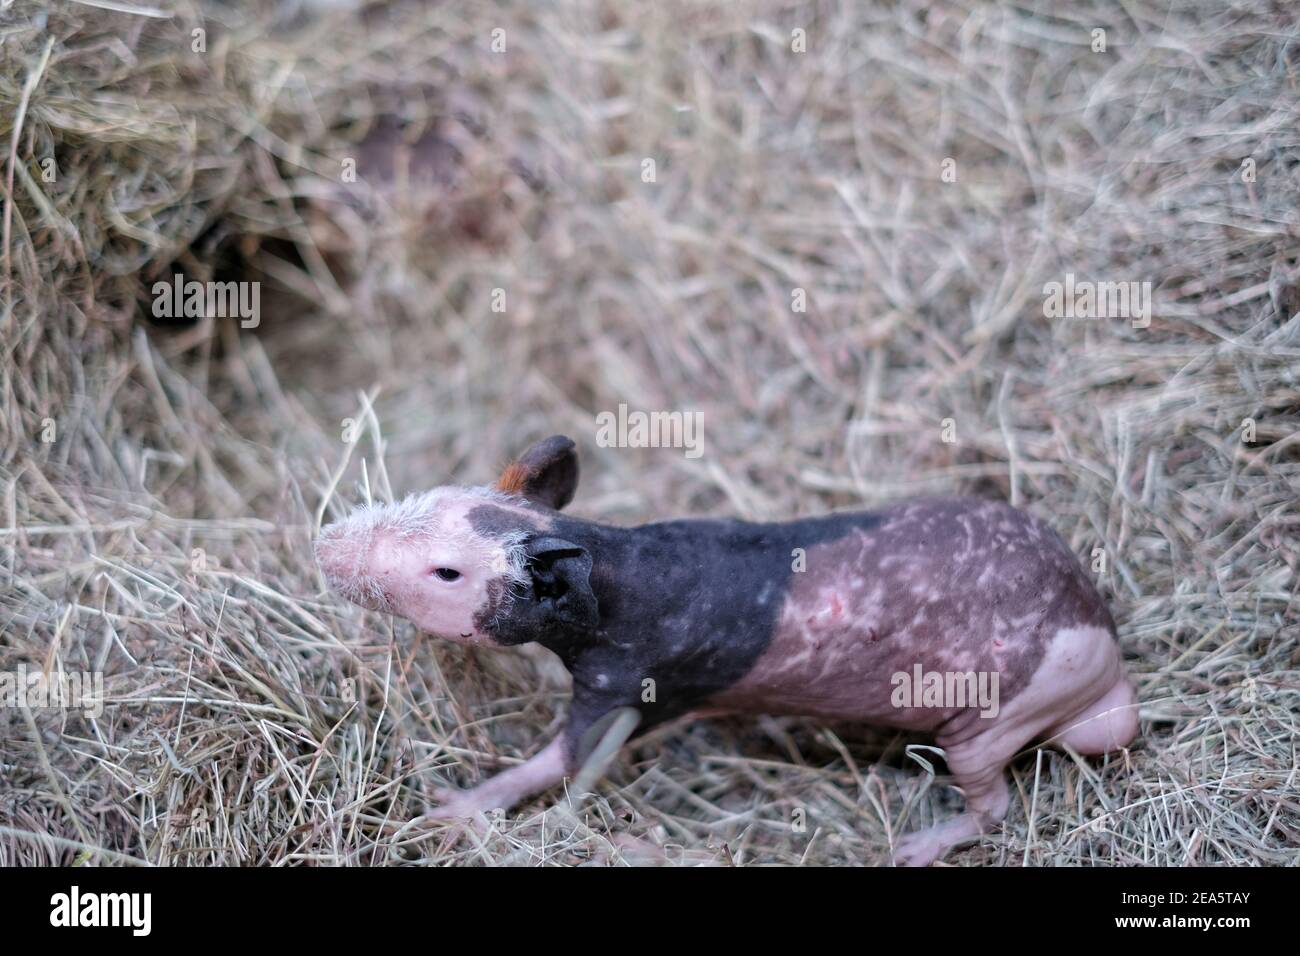 The top view of a hairless guinea pig walking around in its enclosure with hay flooring. Stock Photo